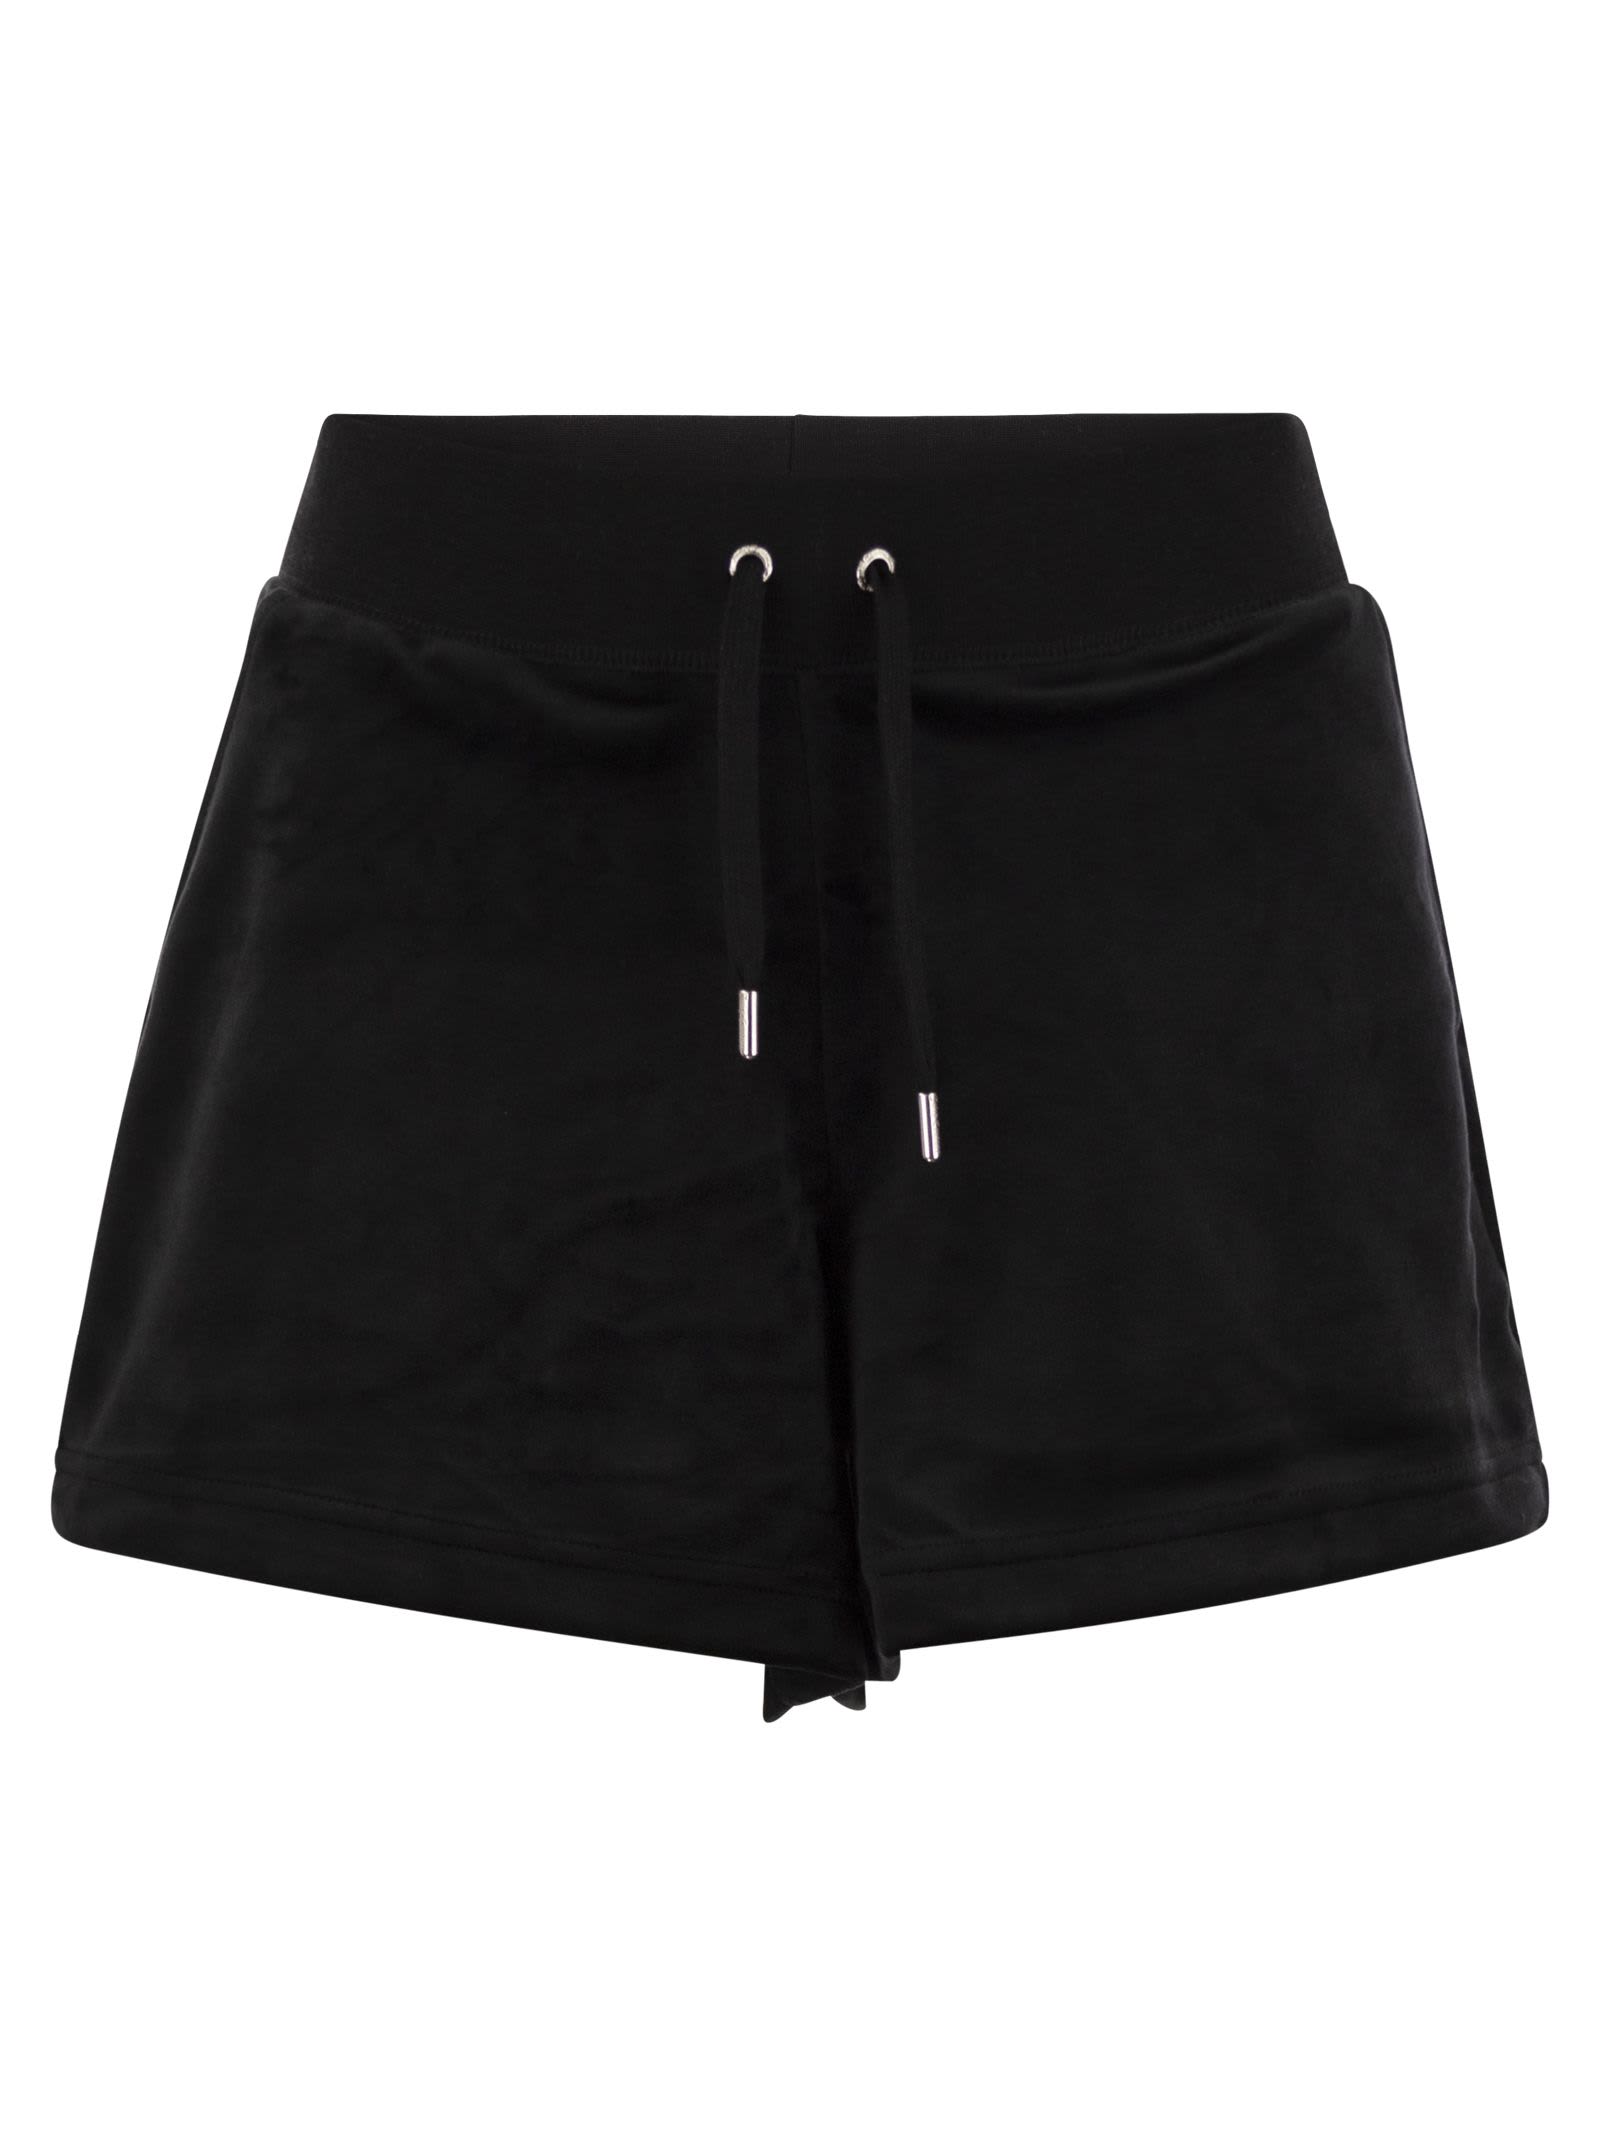 Juicy Couture Velour Shorts In Black